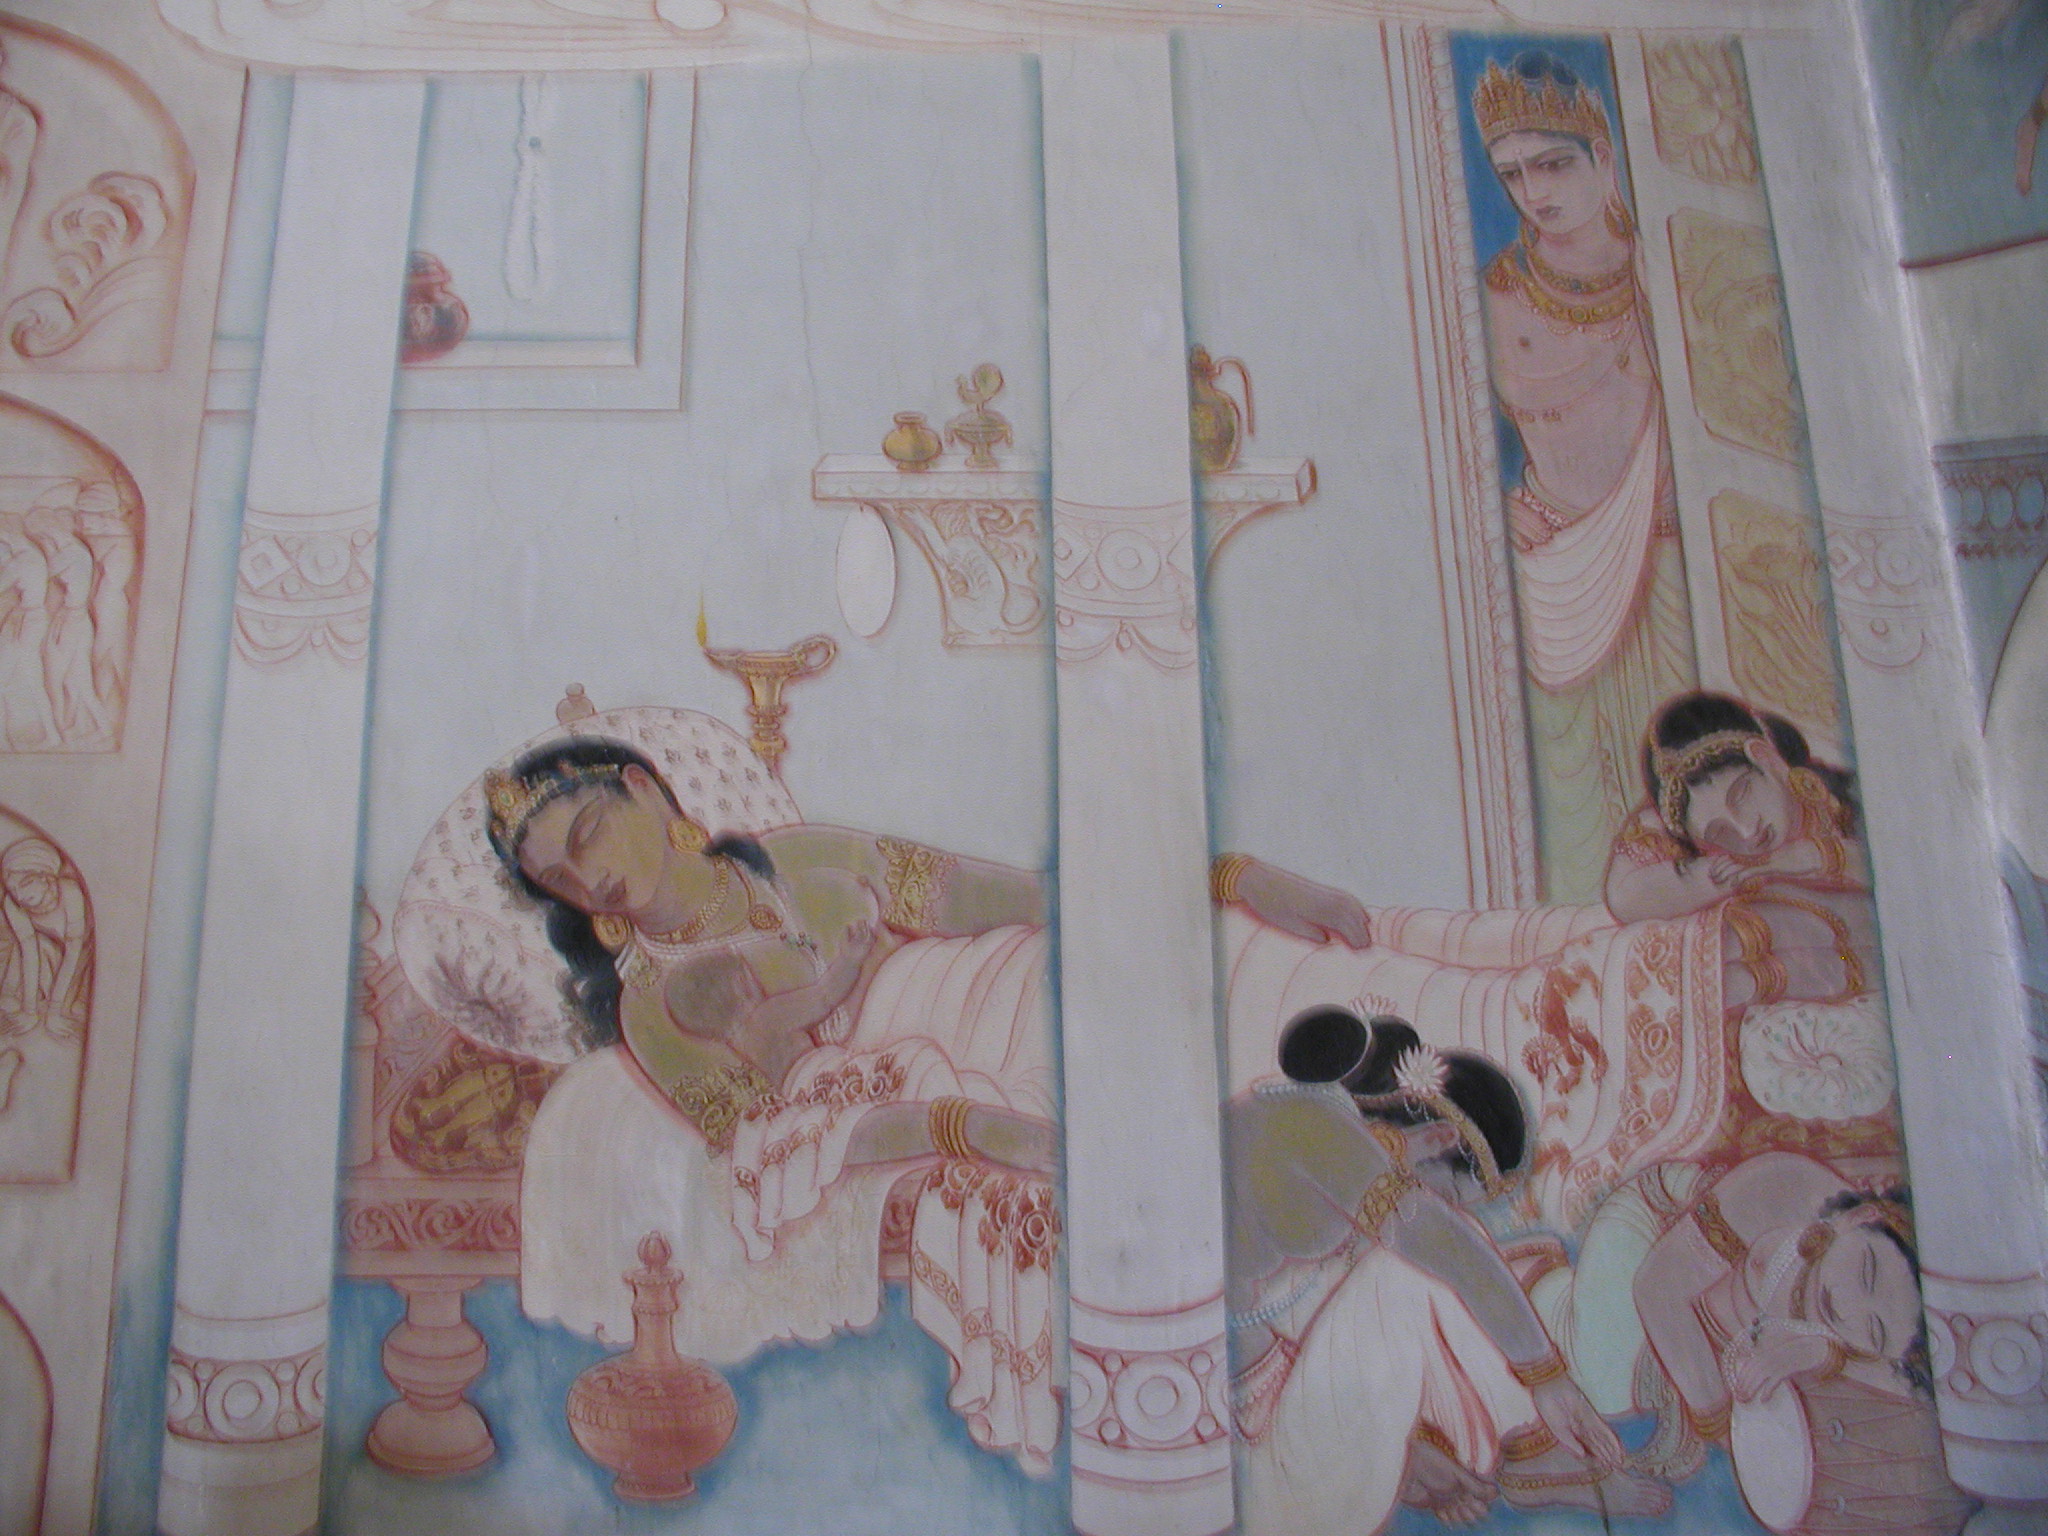 Artwork on the walls of a Buddhist temple 